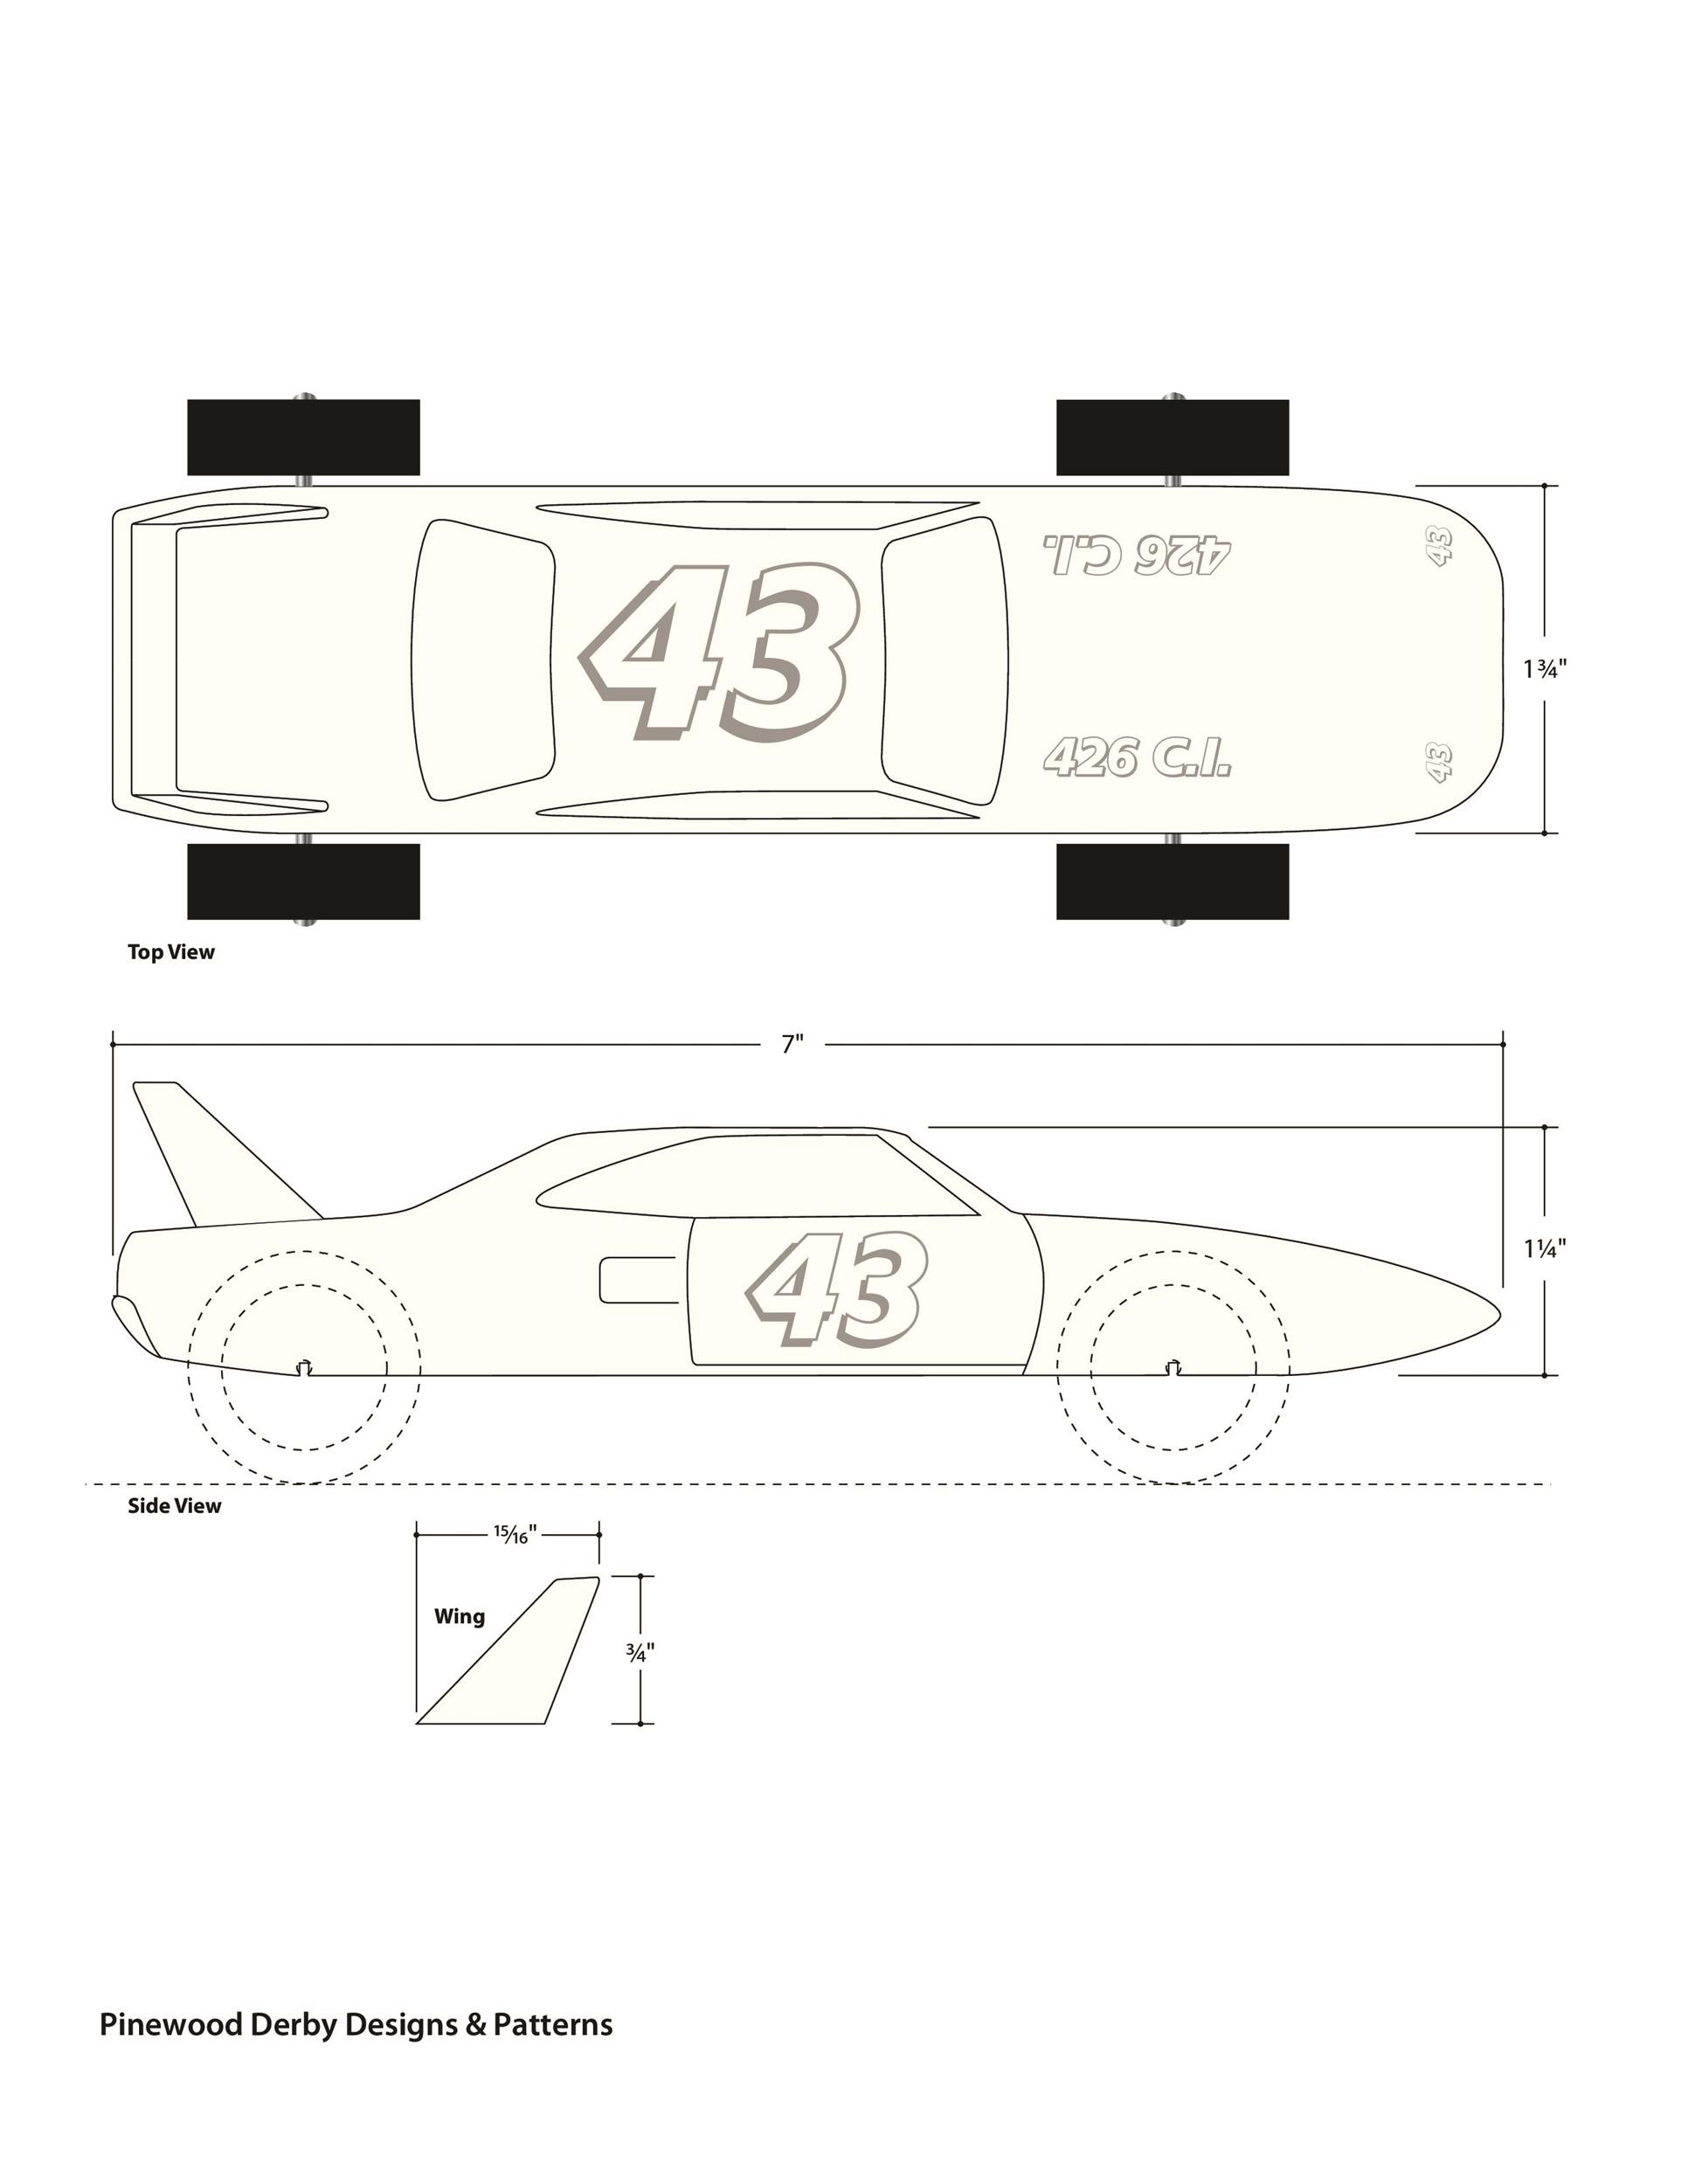 39 Awesome Pinewood Derby Car Designs & Templates ᐅ TemplateLab